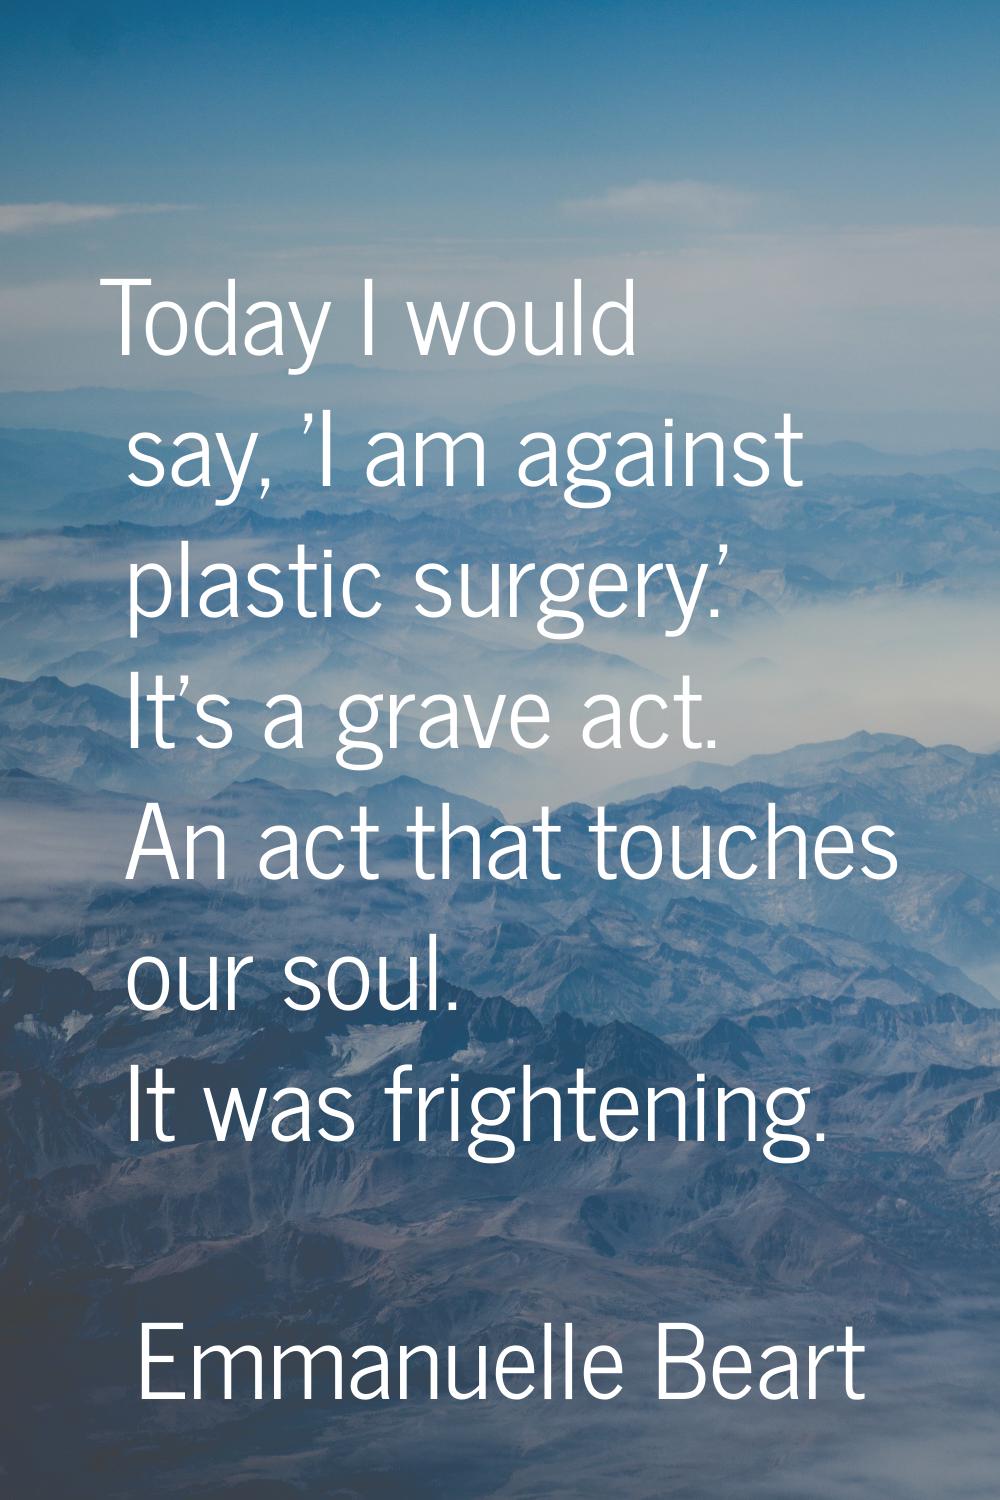 Today I would say, 'I am against plastic surgery.' It's a grave act. An act that touches our soul. 